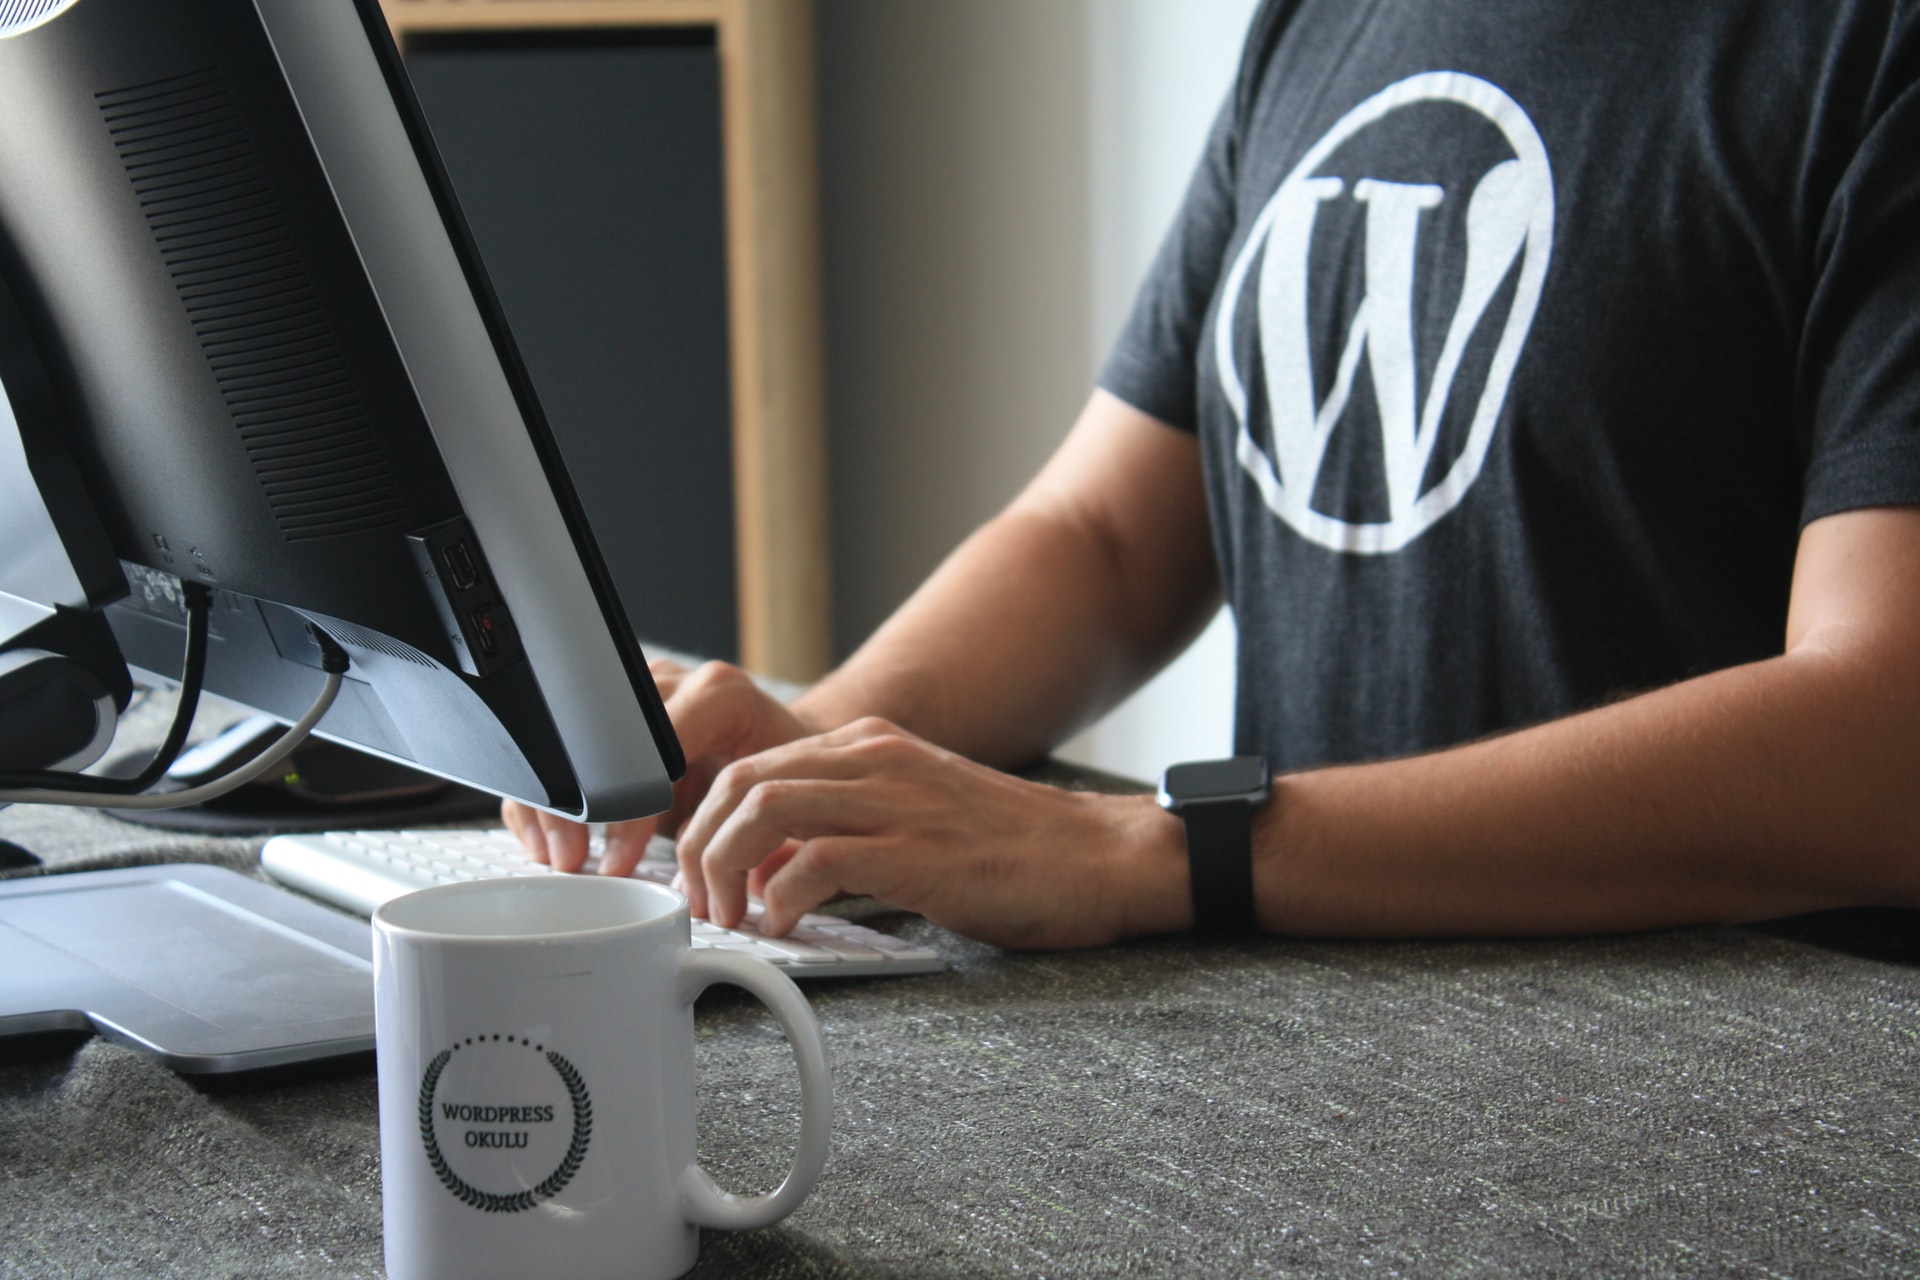 Avail WordPress Product at weDevs at An Affordable Price